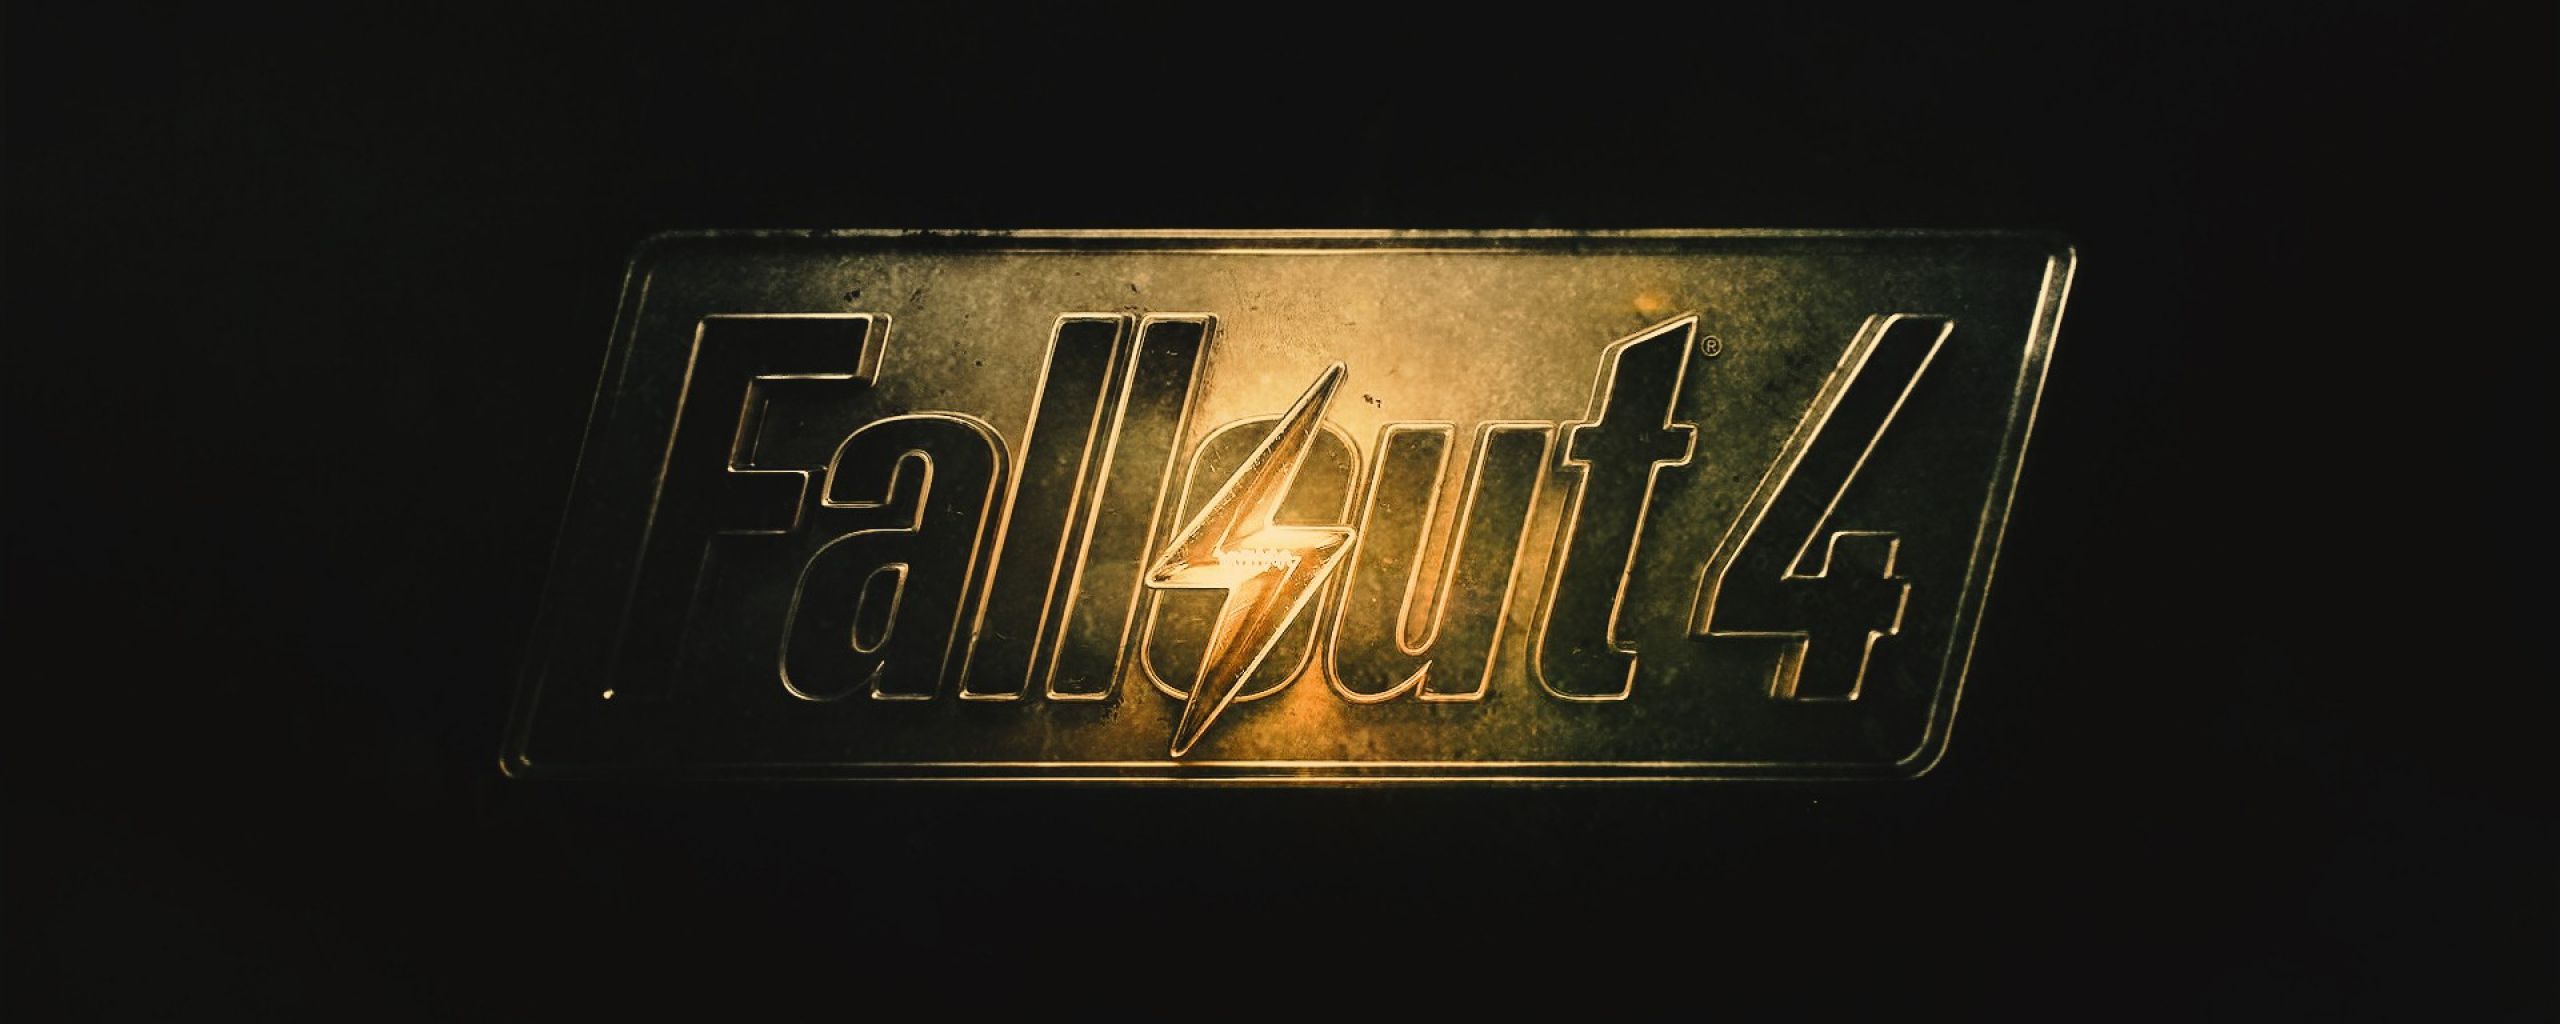 Dual Monitor Fallout Wallpapers